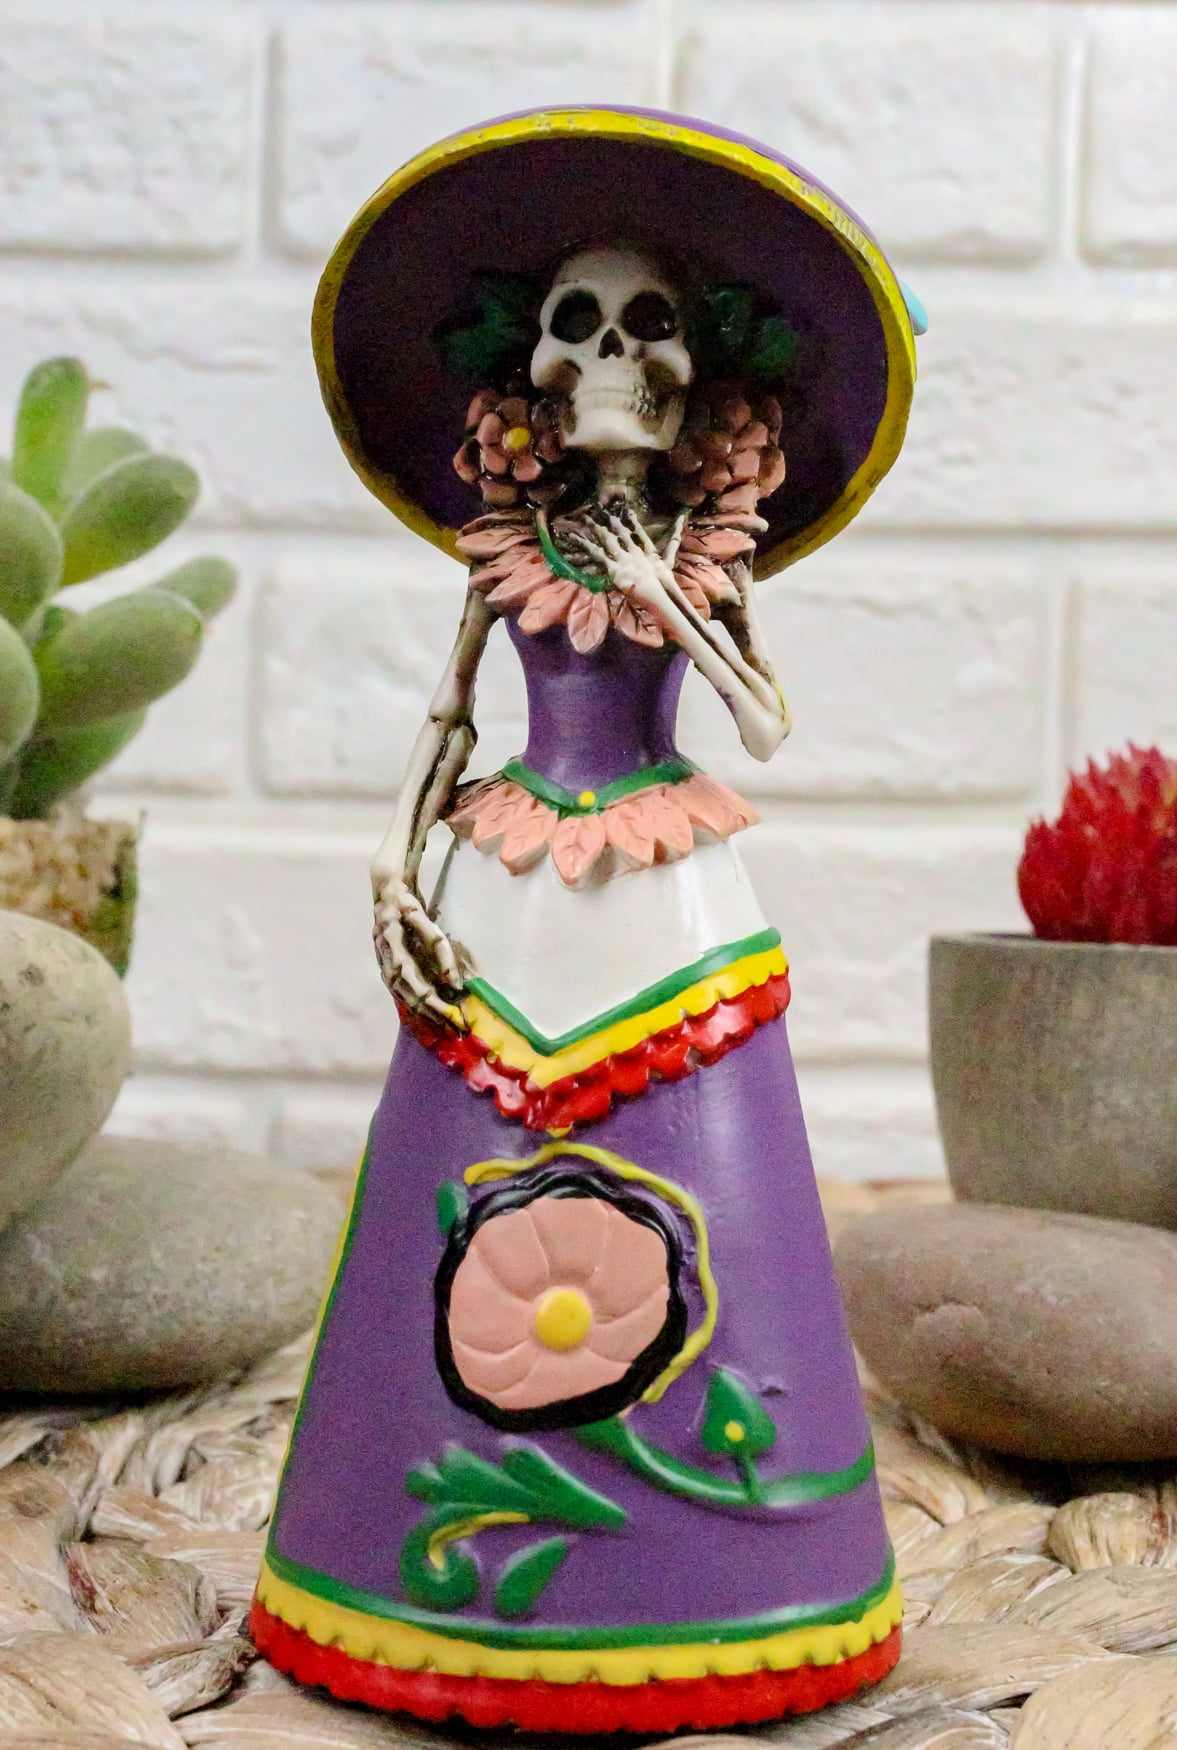 Blue Skeleton Lady in a Dress Posing 6"L Ebros Day of the Dead Black Haired 